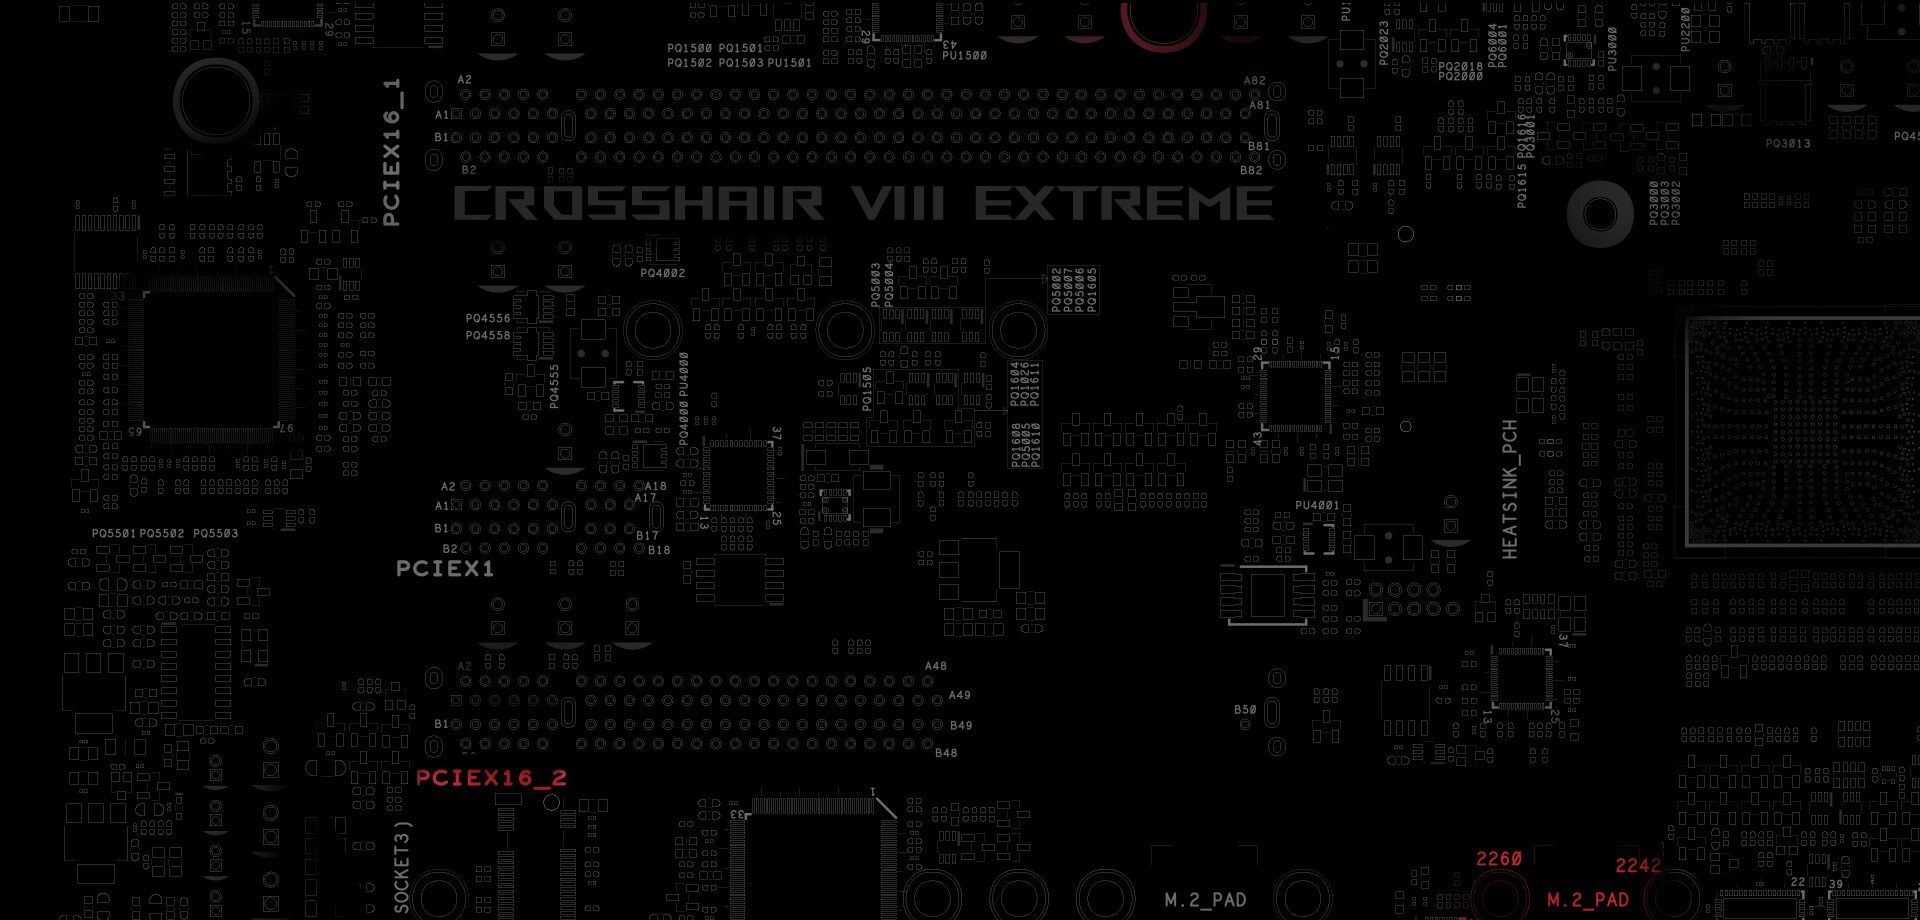 The PCB design of ROG Crosshair VIII Extreme